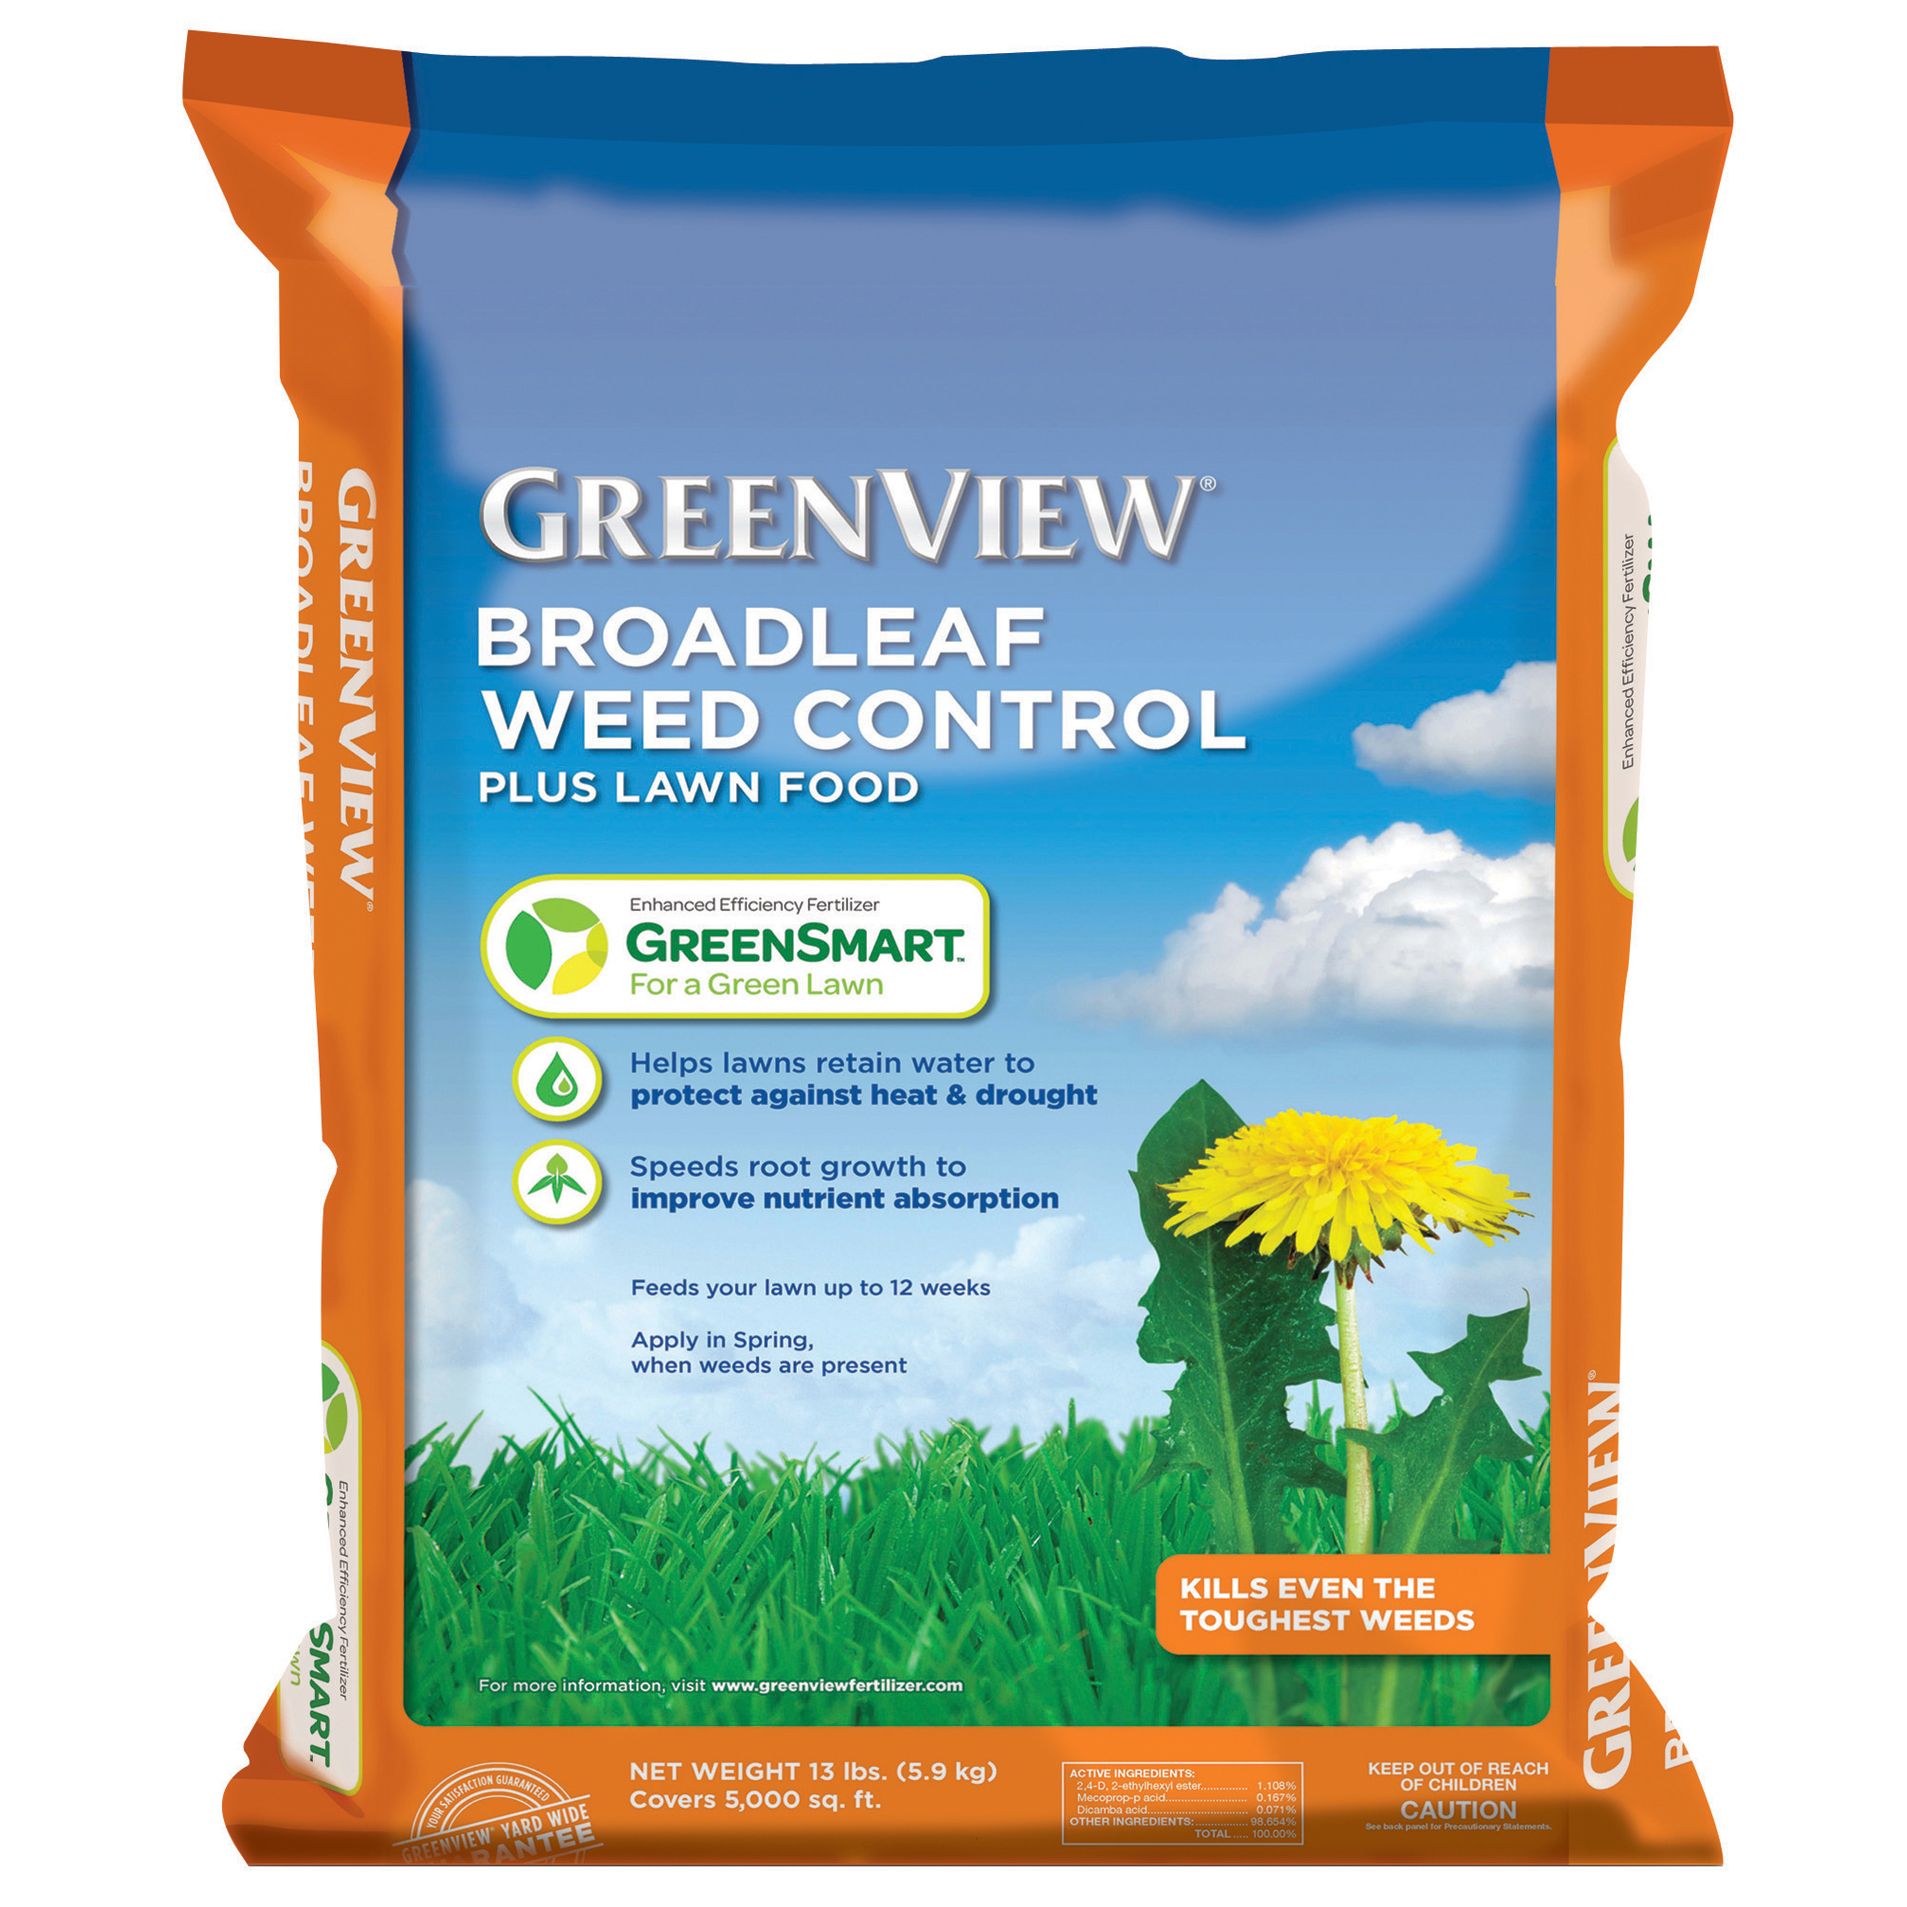 Lebanon GRV2131170 Greenview&#174; Broadleaf Weed Control Plus Lawn Feed with Greensmart 22-0-4 with Trimec Ester, 15M